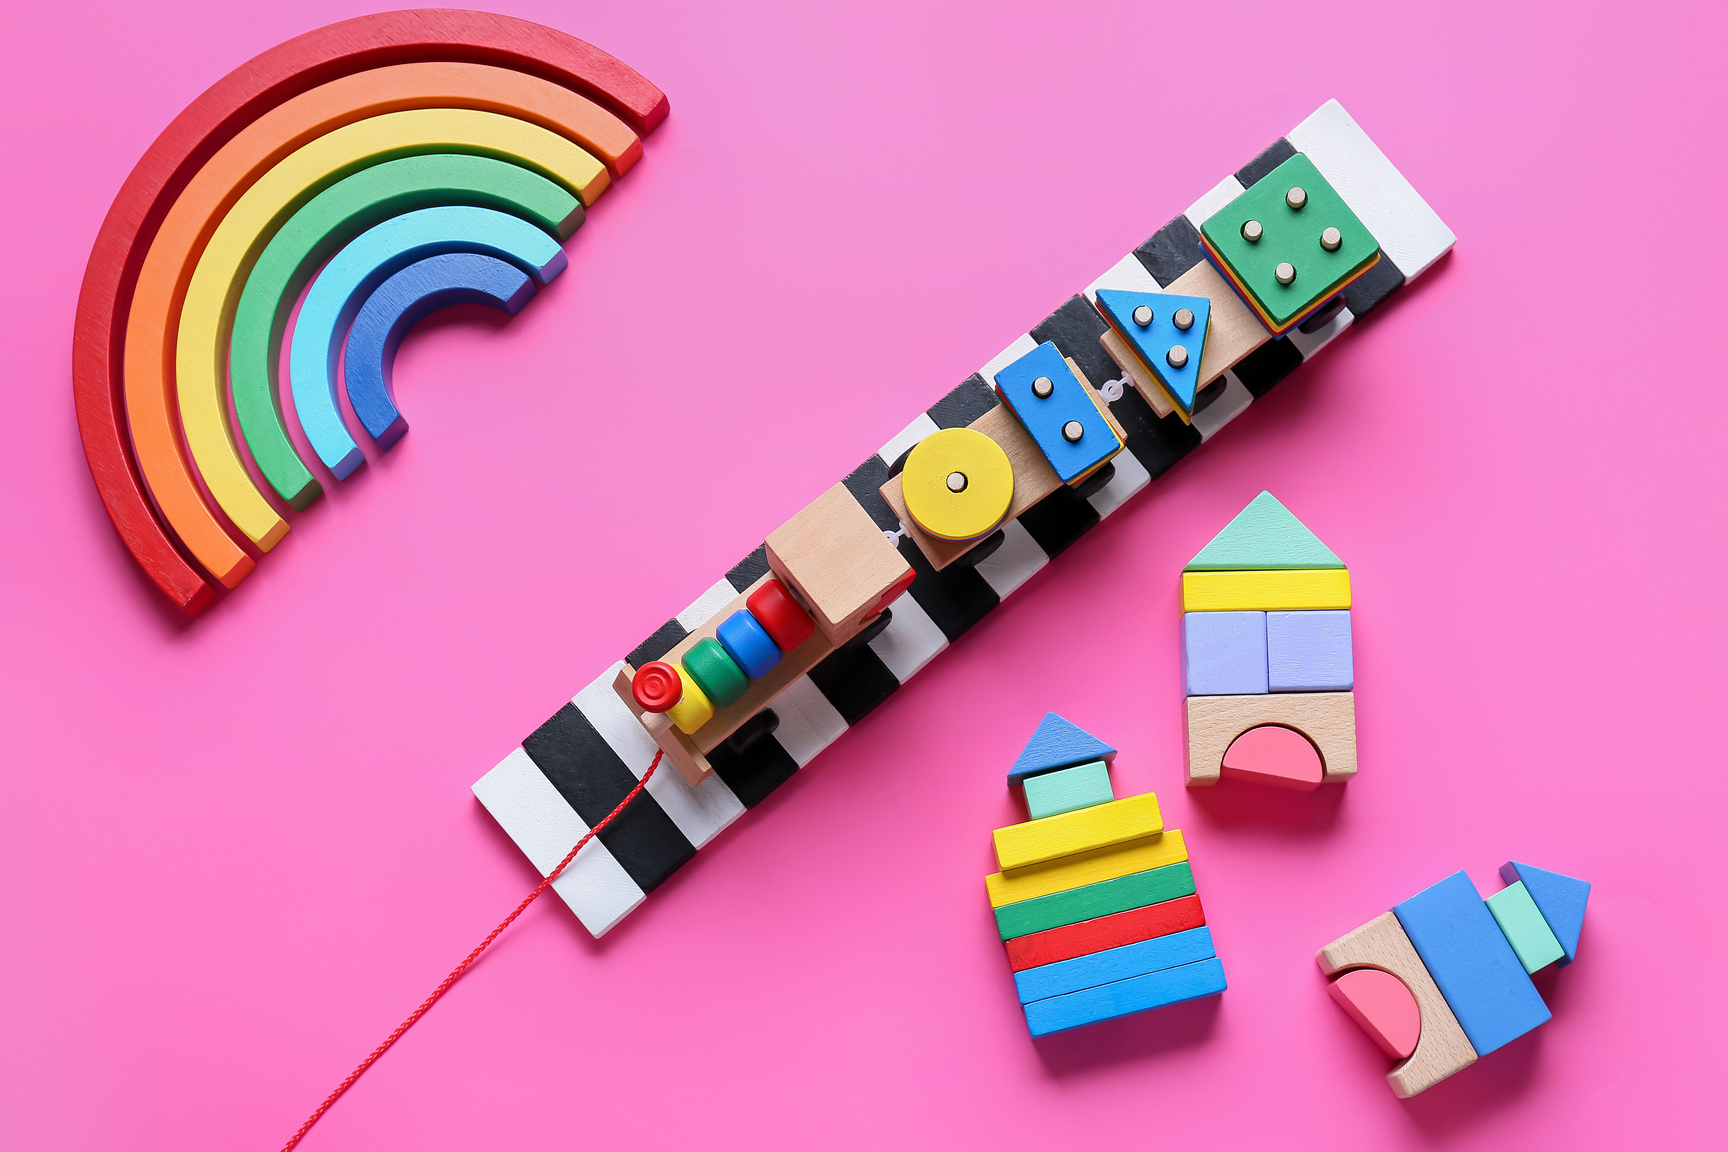 Toy Train with Building Blocks on Pink Background